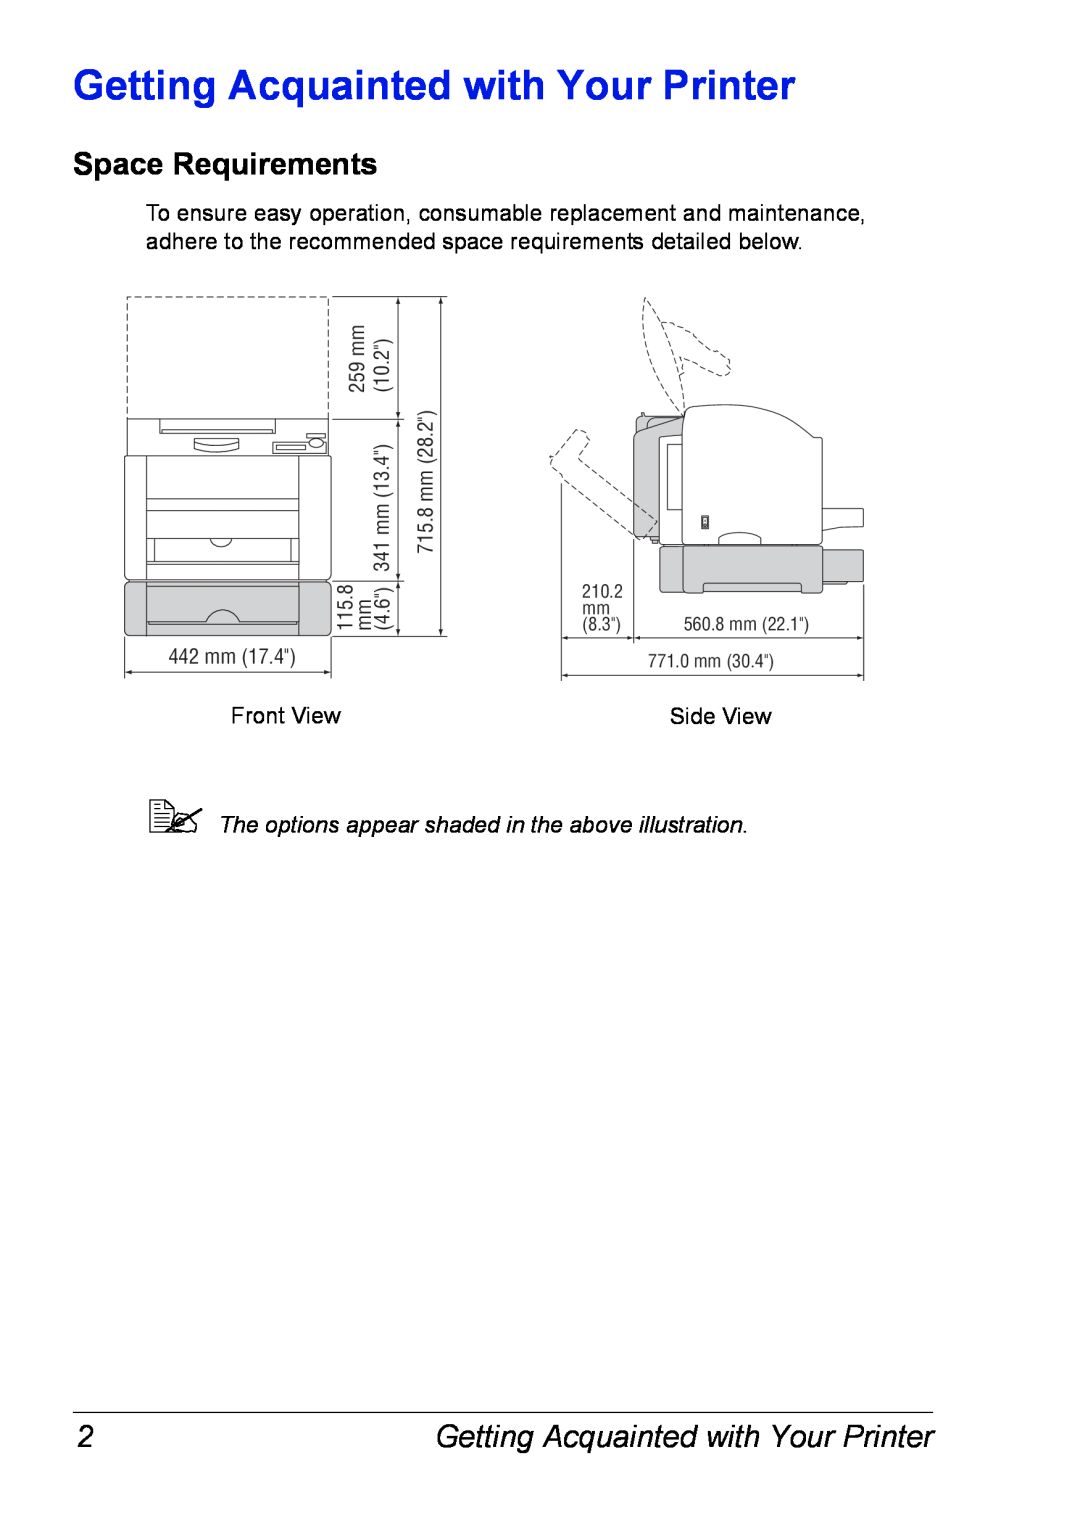 Xerox 6120 Getting Acquainted with Your Printer, Space Requirements,  The options appear shaded in the above illustration 